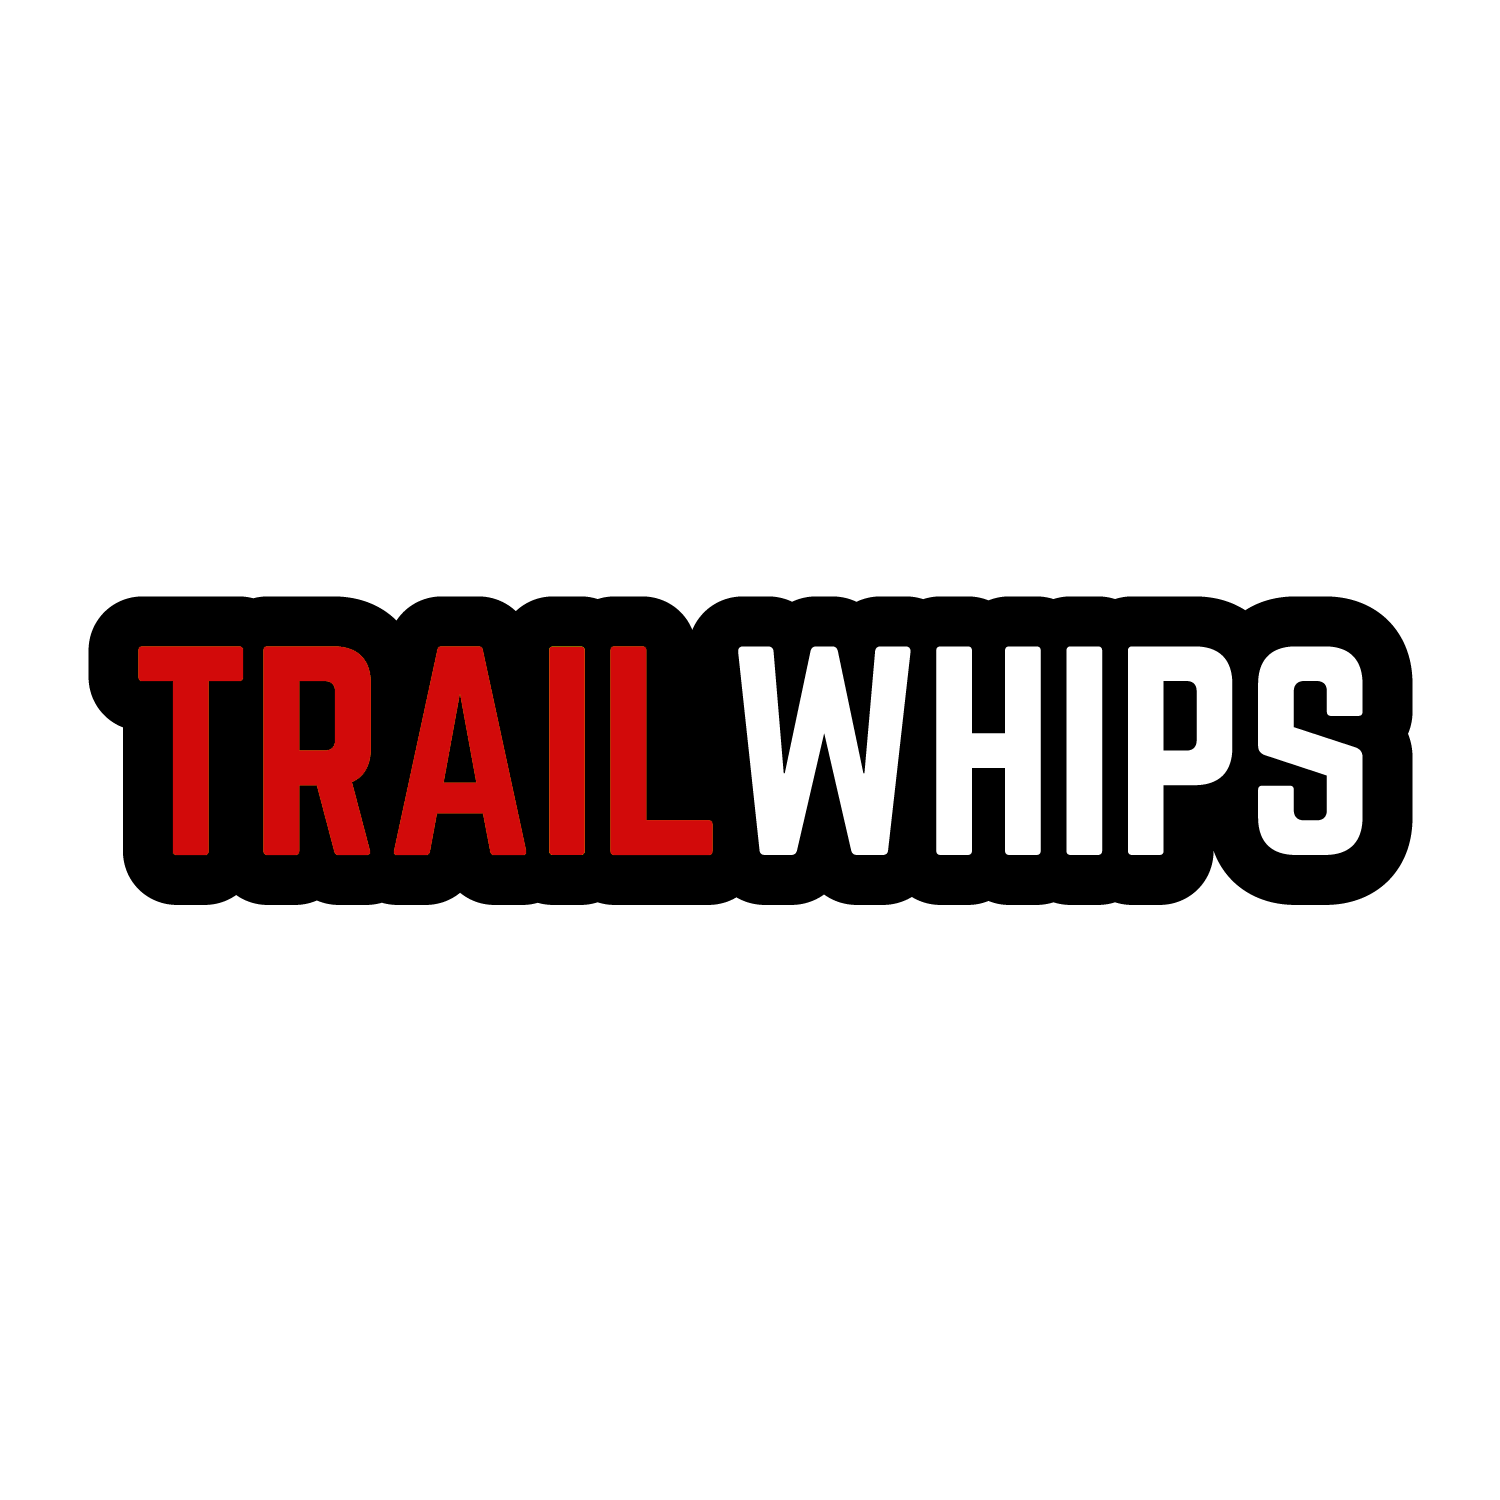 TrailWhips Bubble Rectangle Sticker - Black Background - TrailWhips